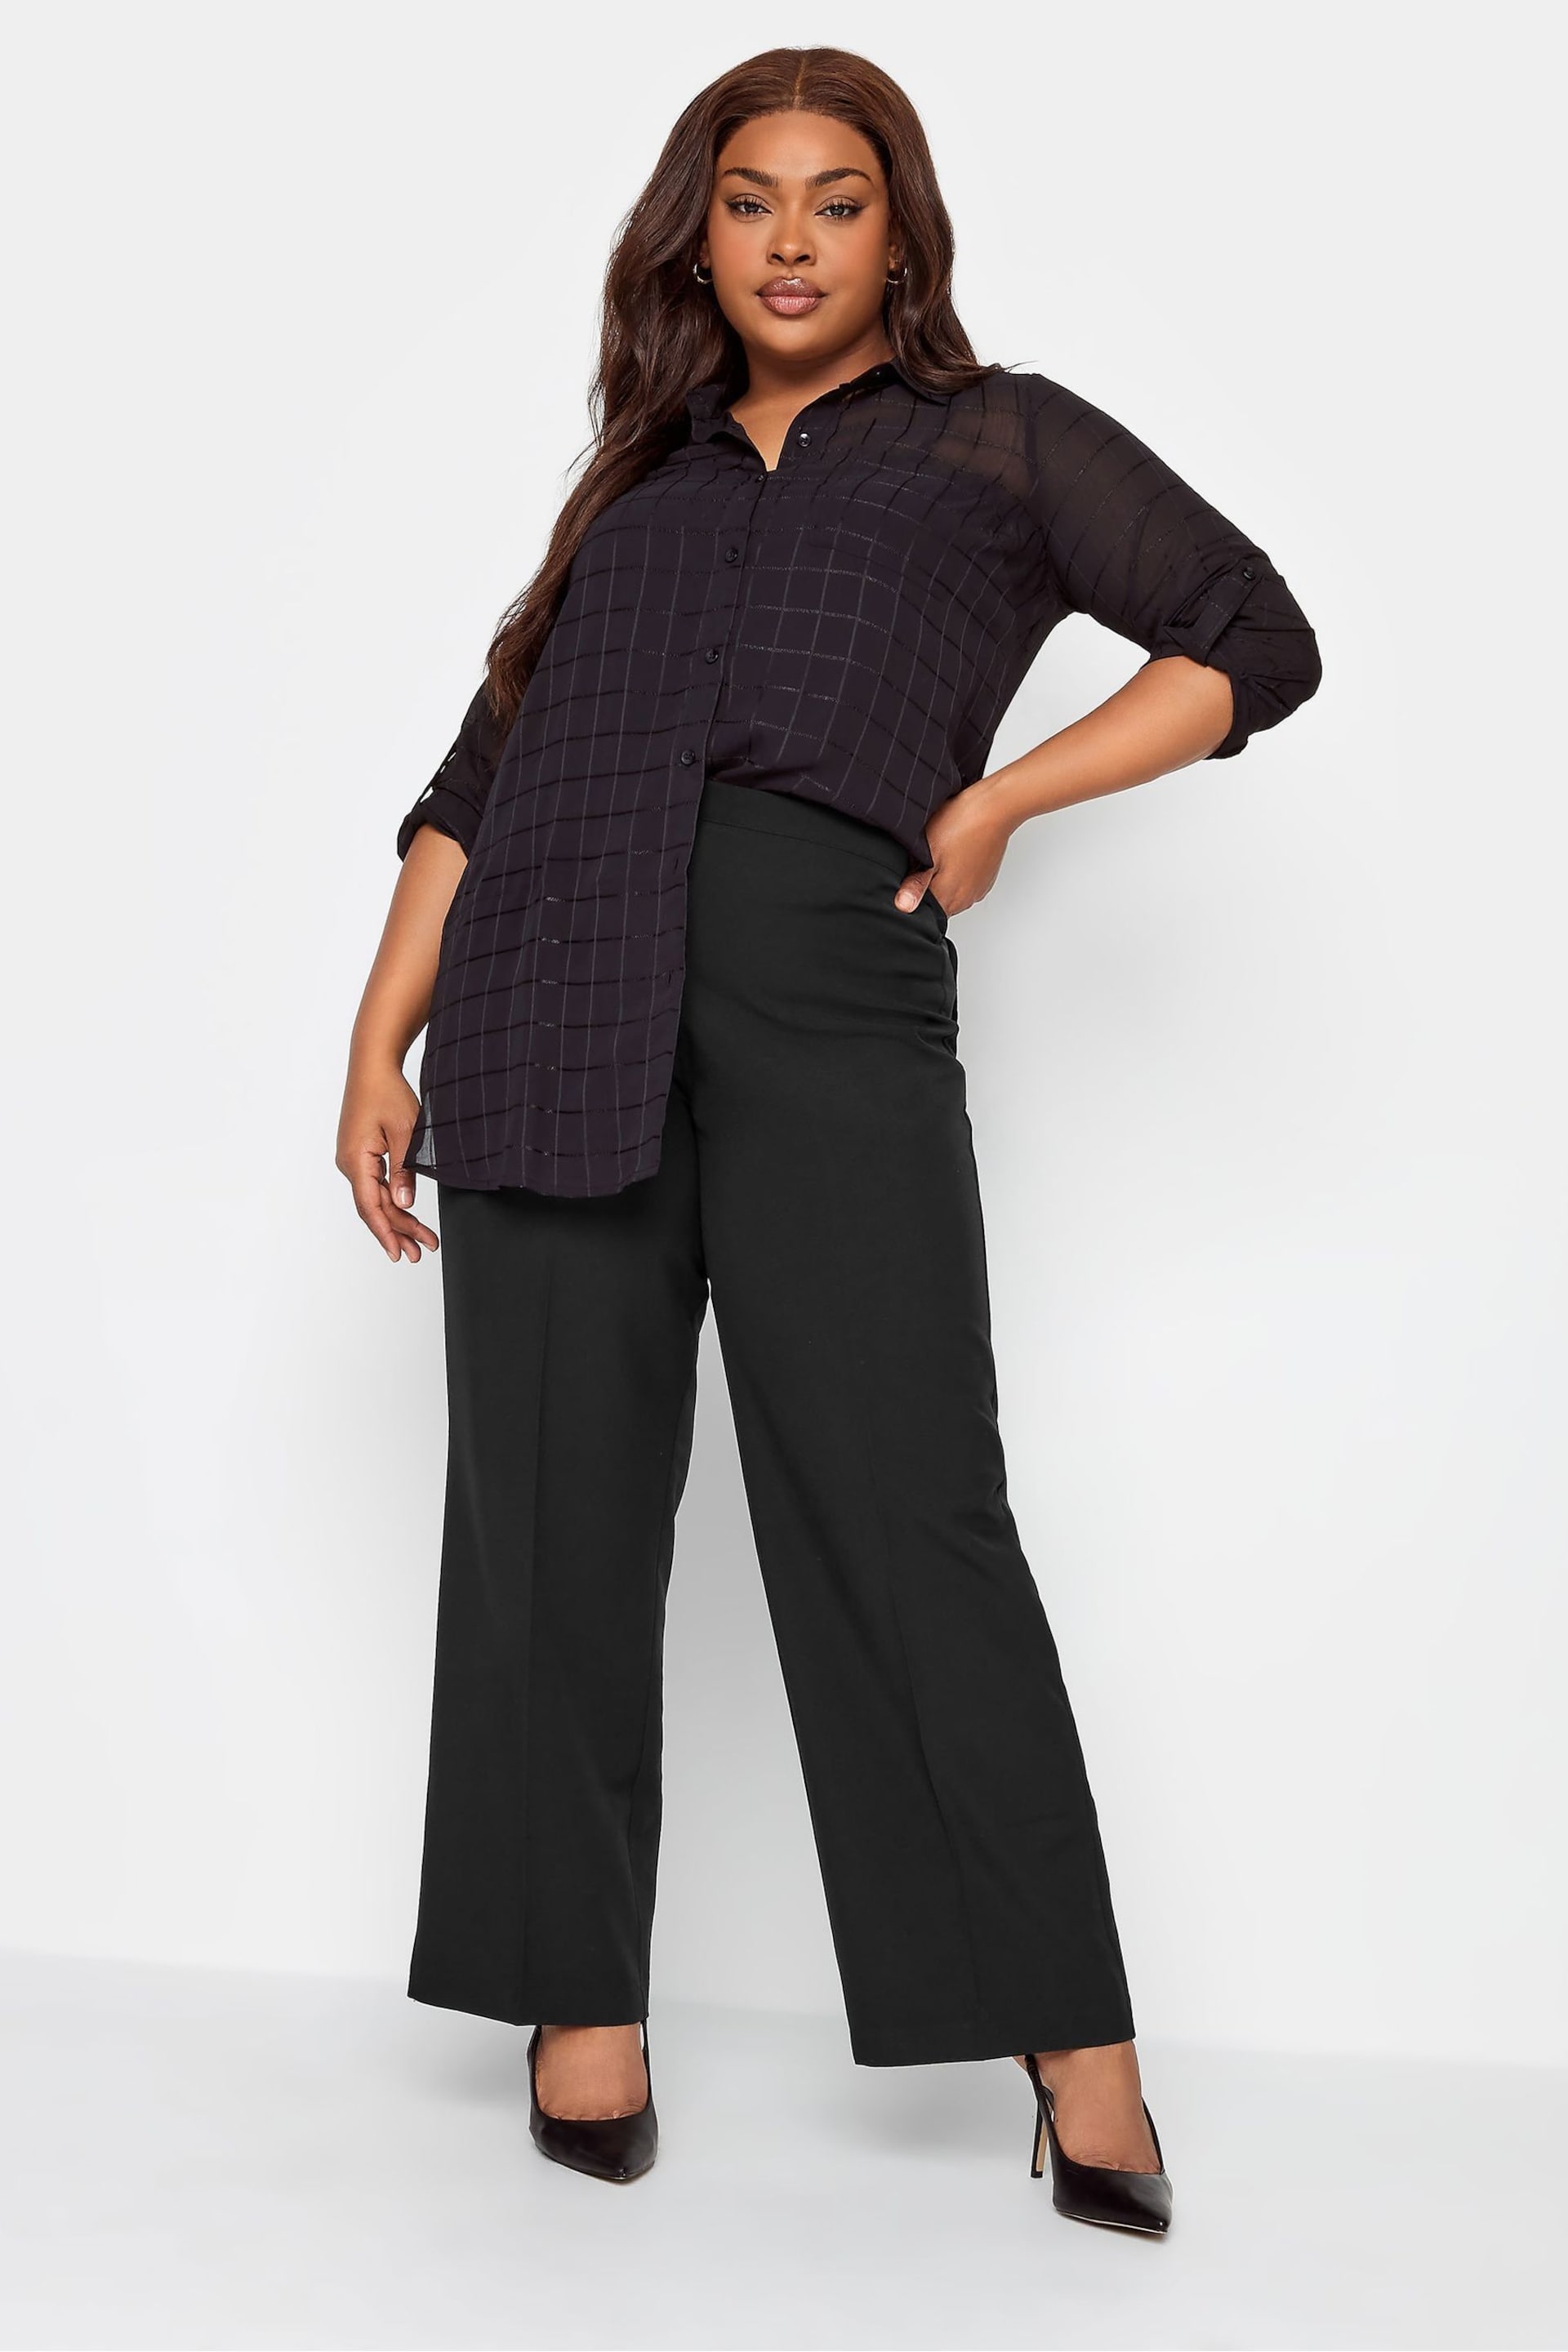 Yours Curve Black Elasticated Stretch Straight Leg Trousers - Image 3 of 6